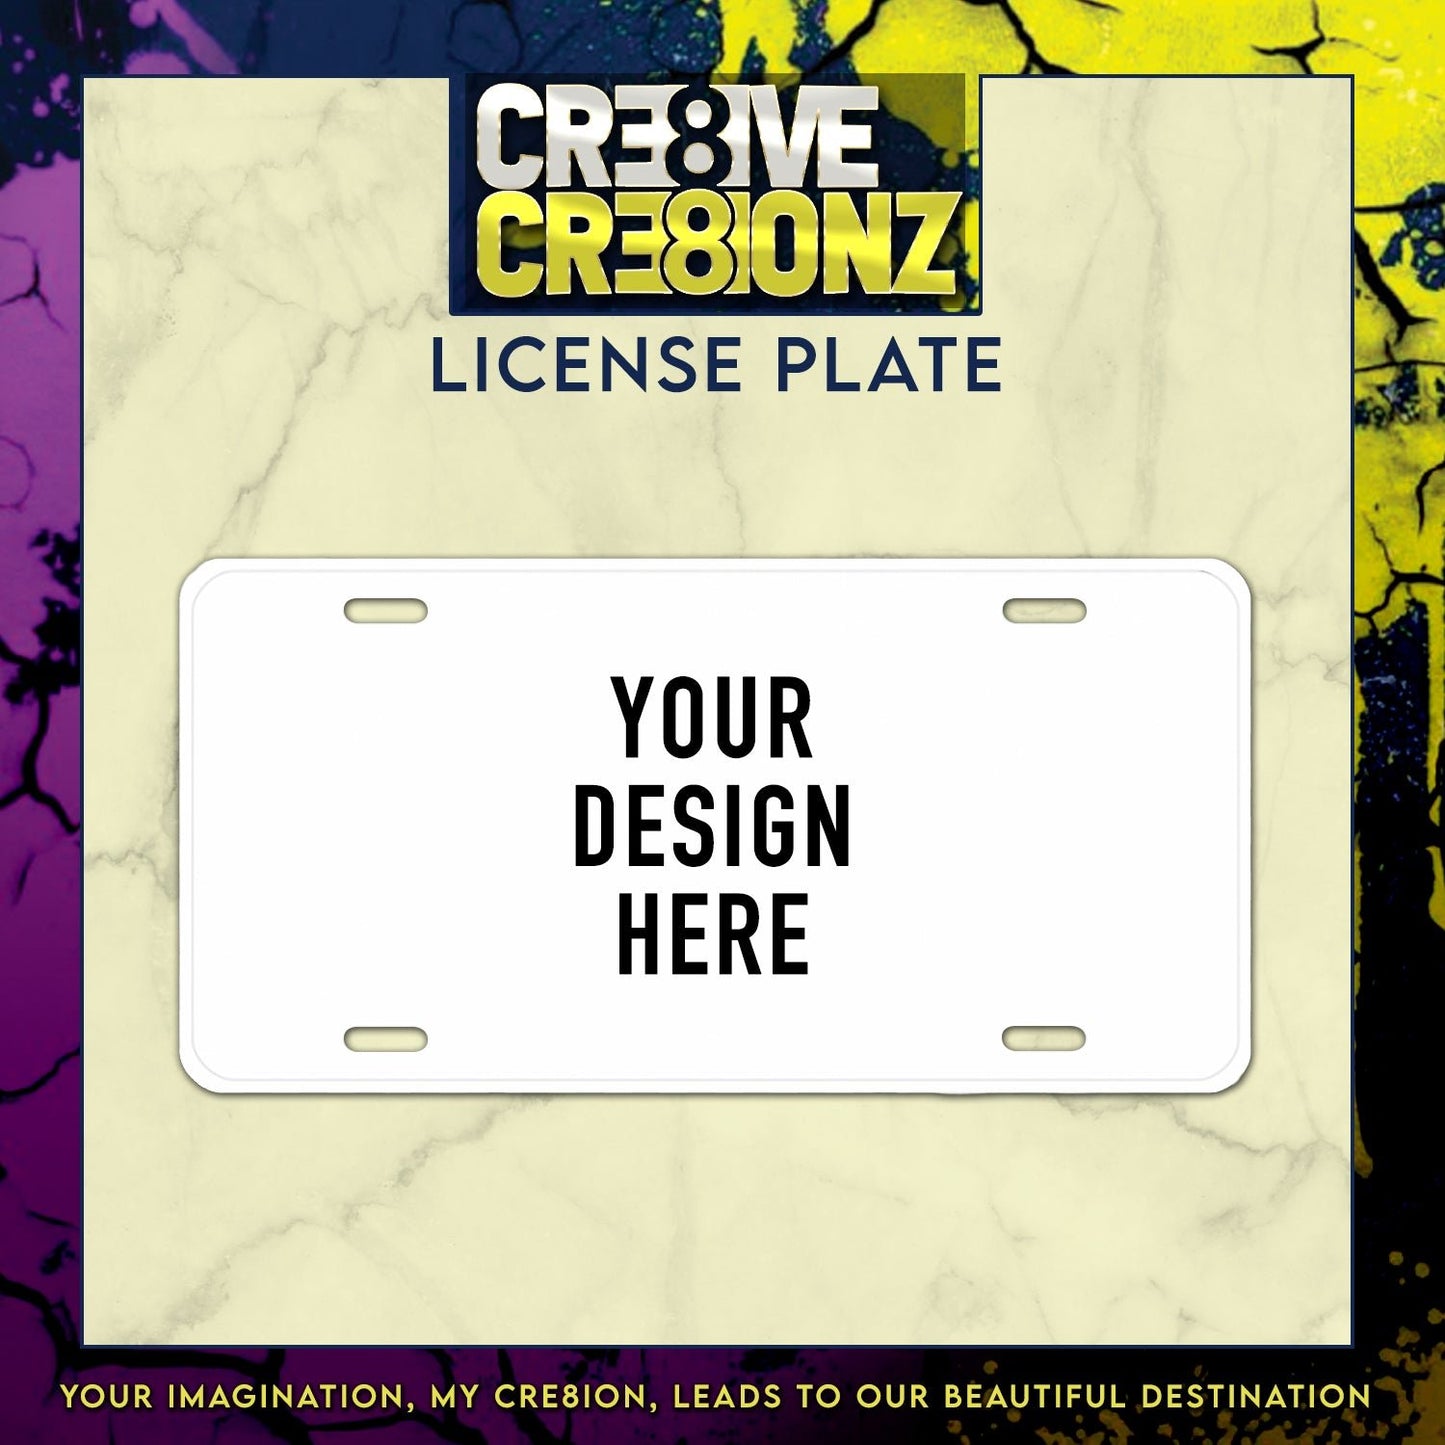 Custom License Plate - Cre8ive Cre8ionz